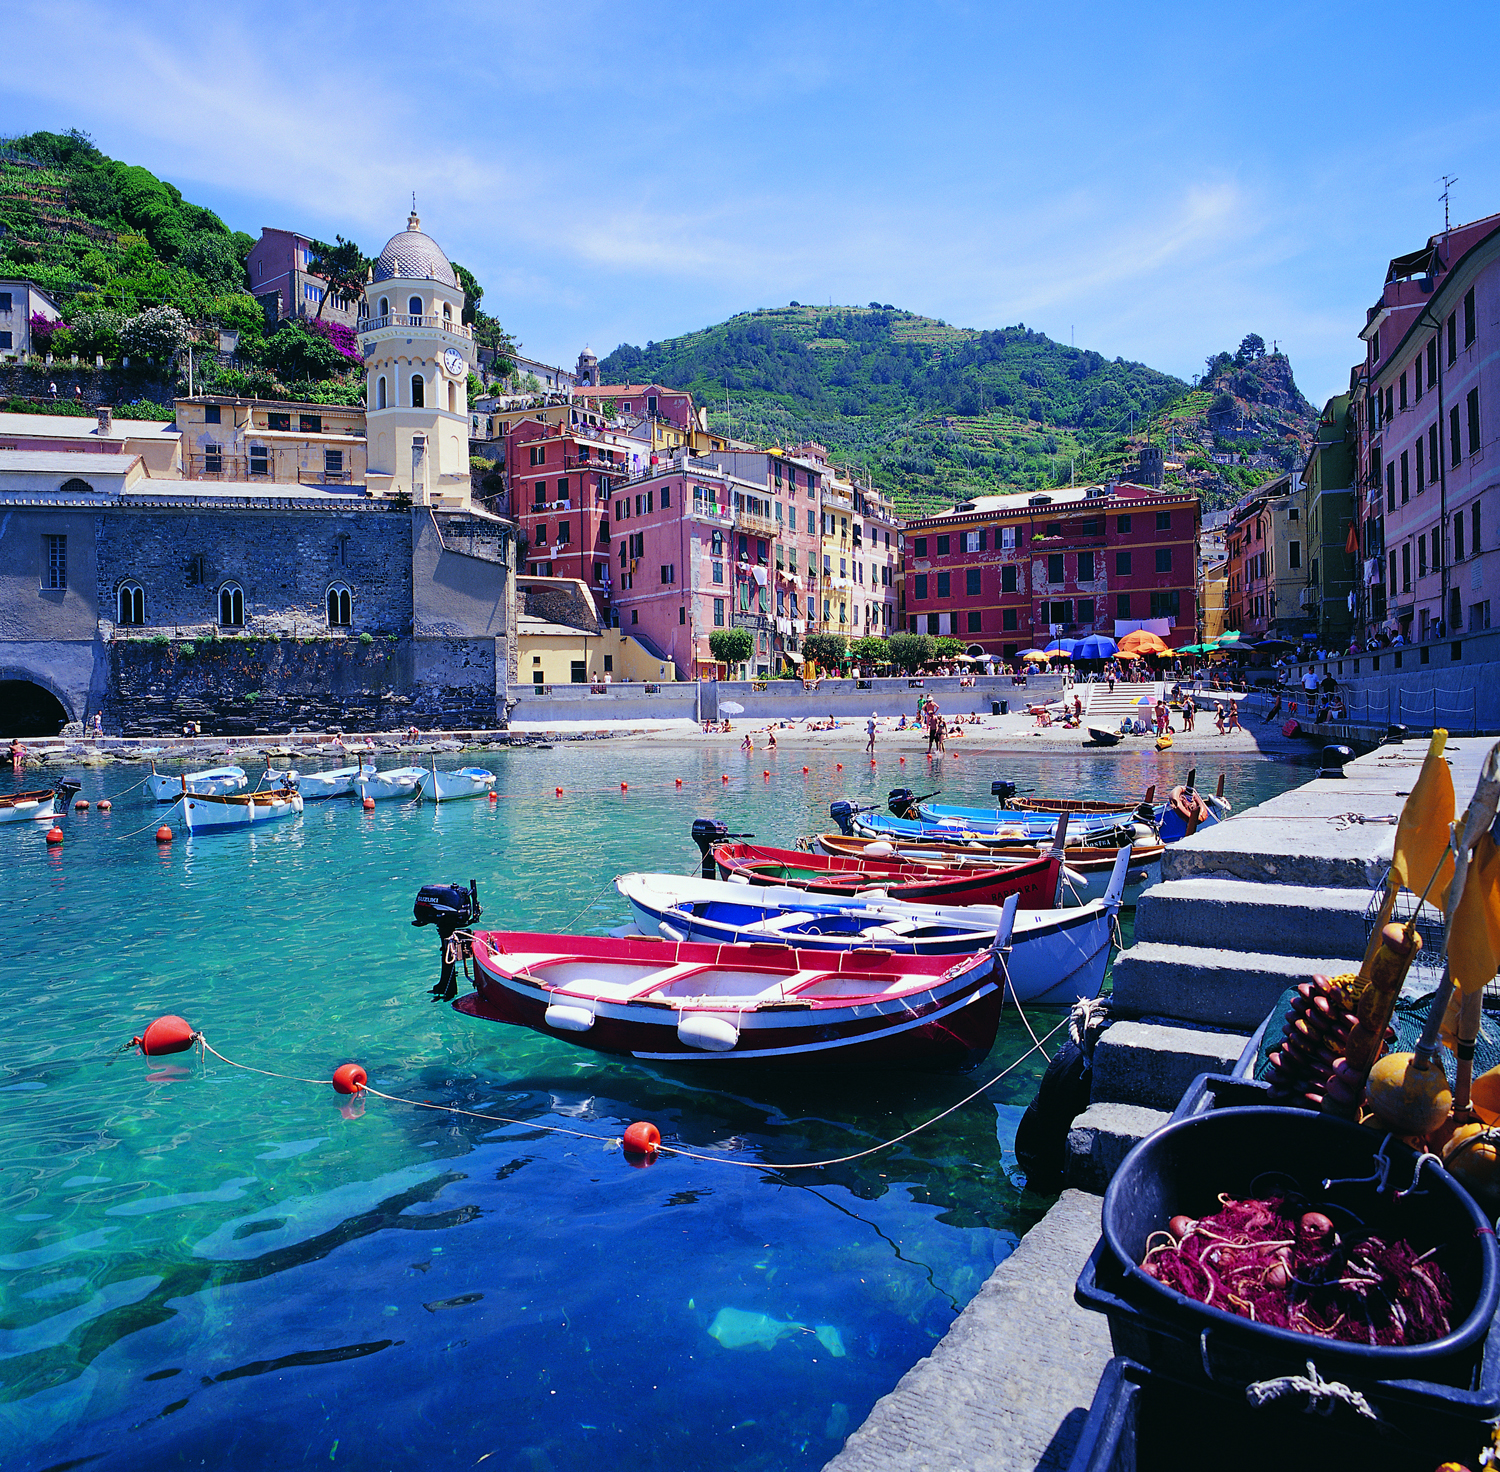 A small harbor in Vernazza, Italy—one of the five villages that make up the Cinque Terre. (Photo credit: Agenzia Regionale In Liguria/FototecaENIT)